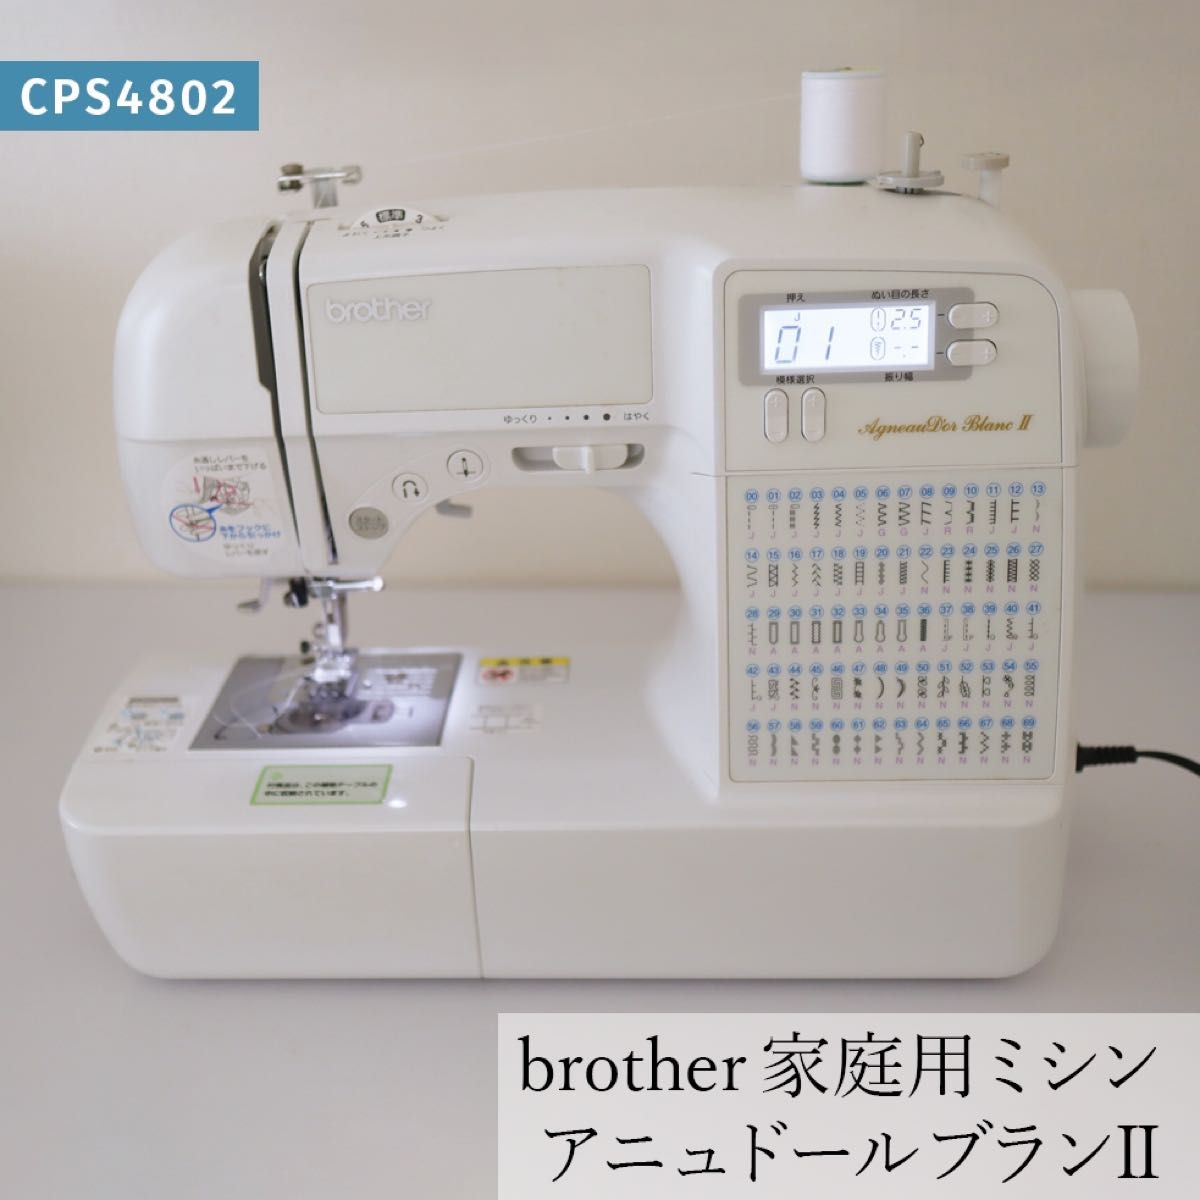 brother 家庭用ミシン 水平釜 CPS4802